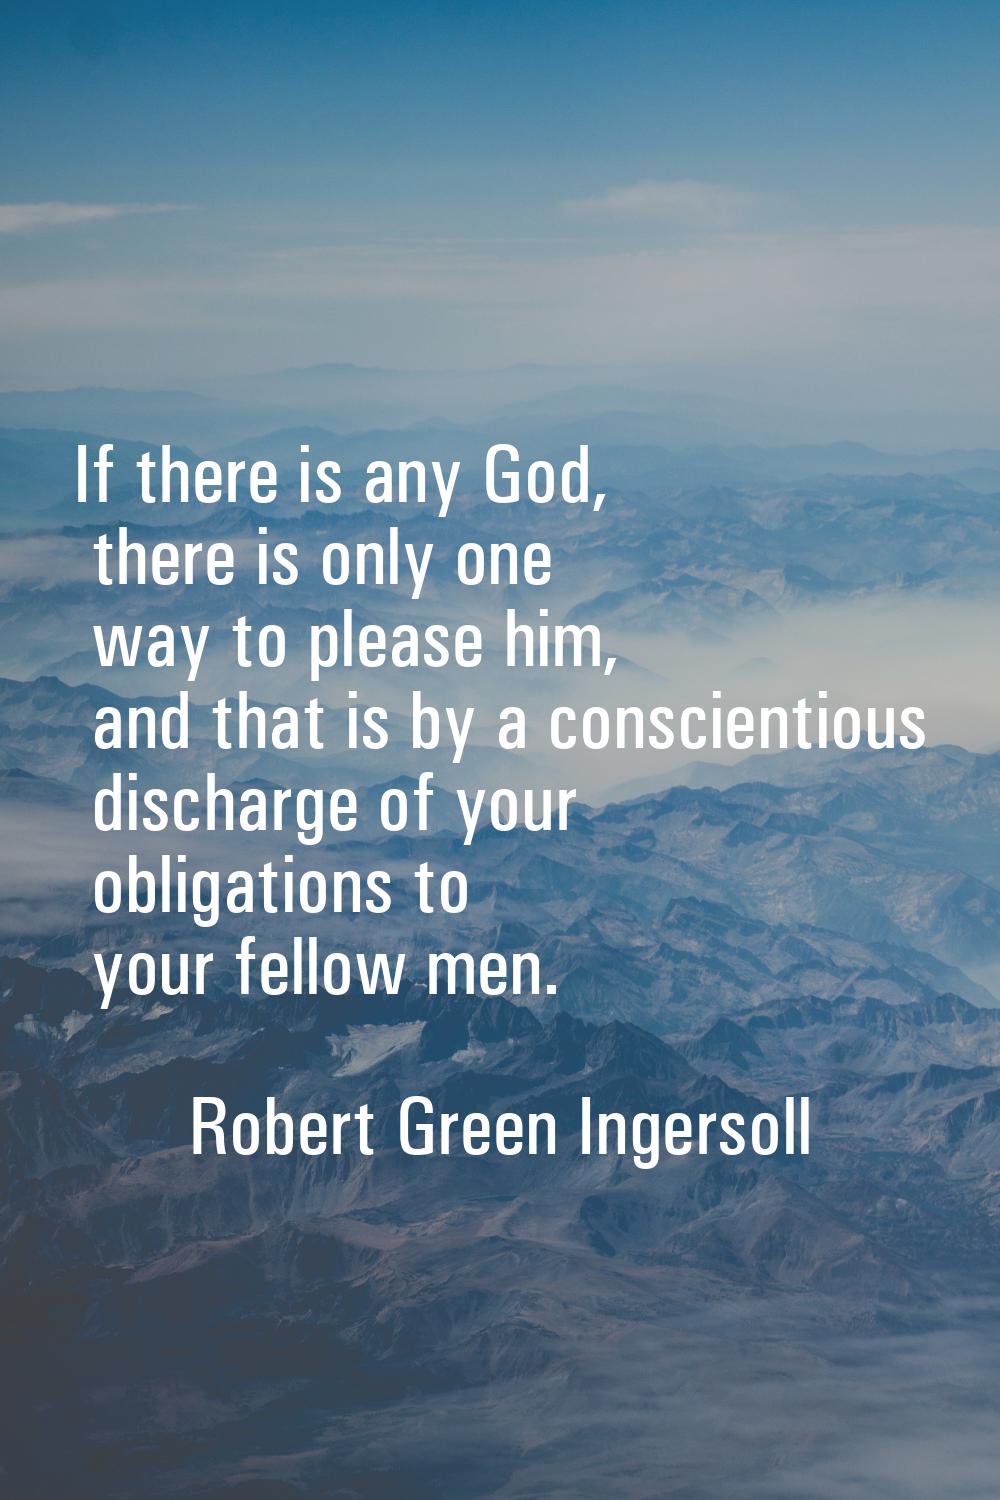 If there is any God, there is only one way to please him, and that is by a conscientious discharge 